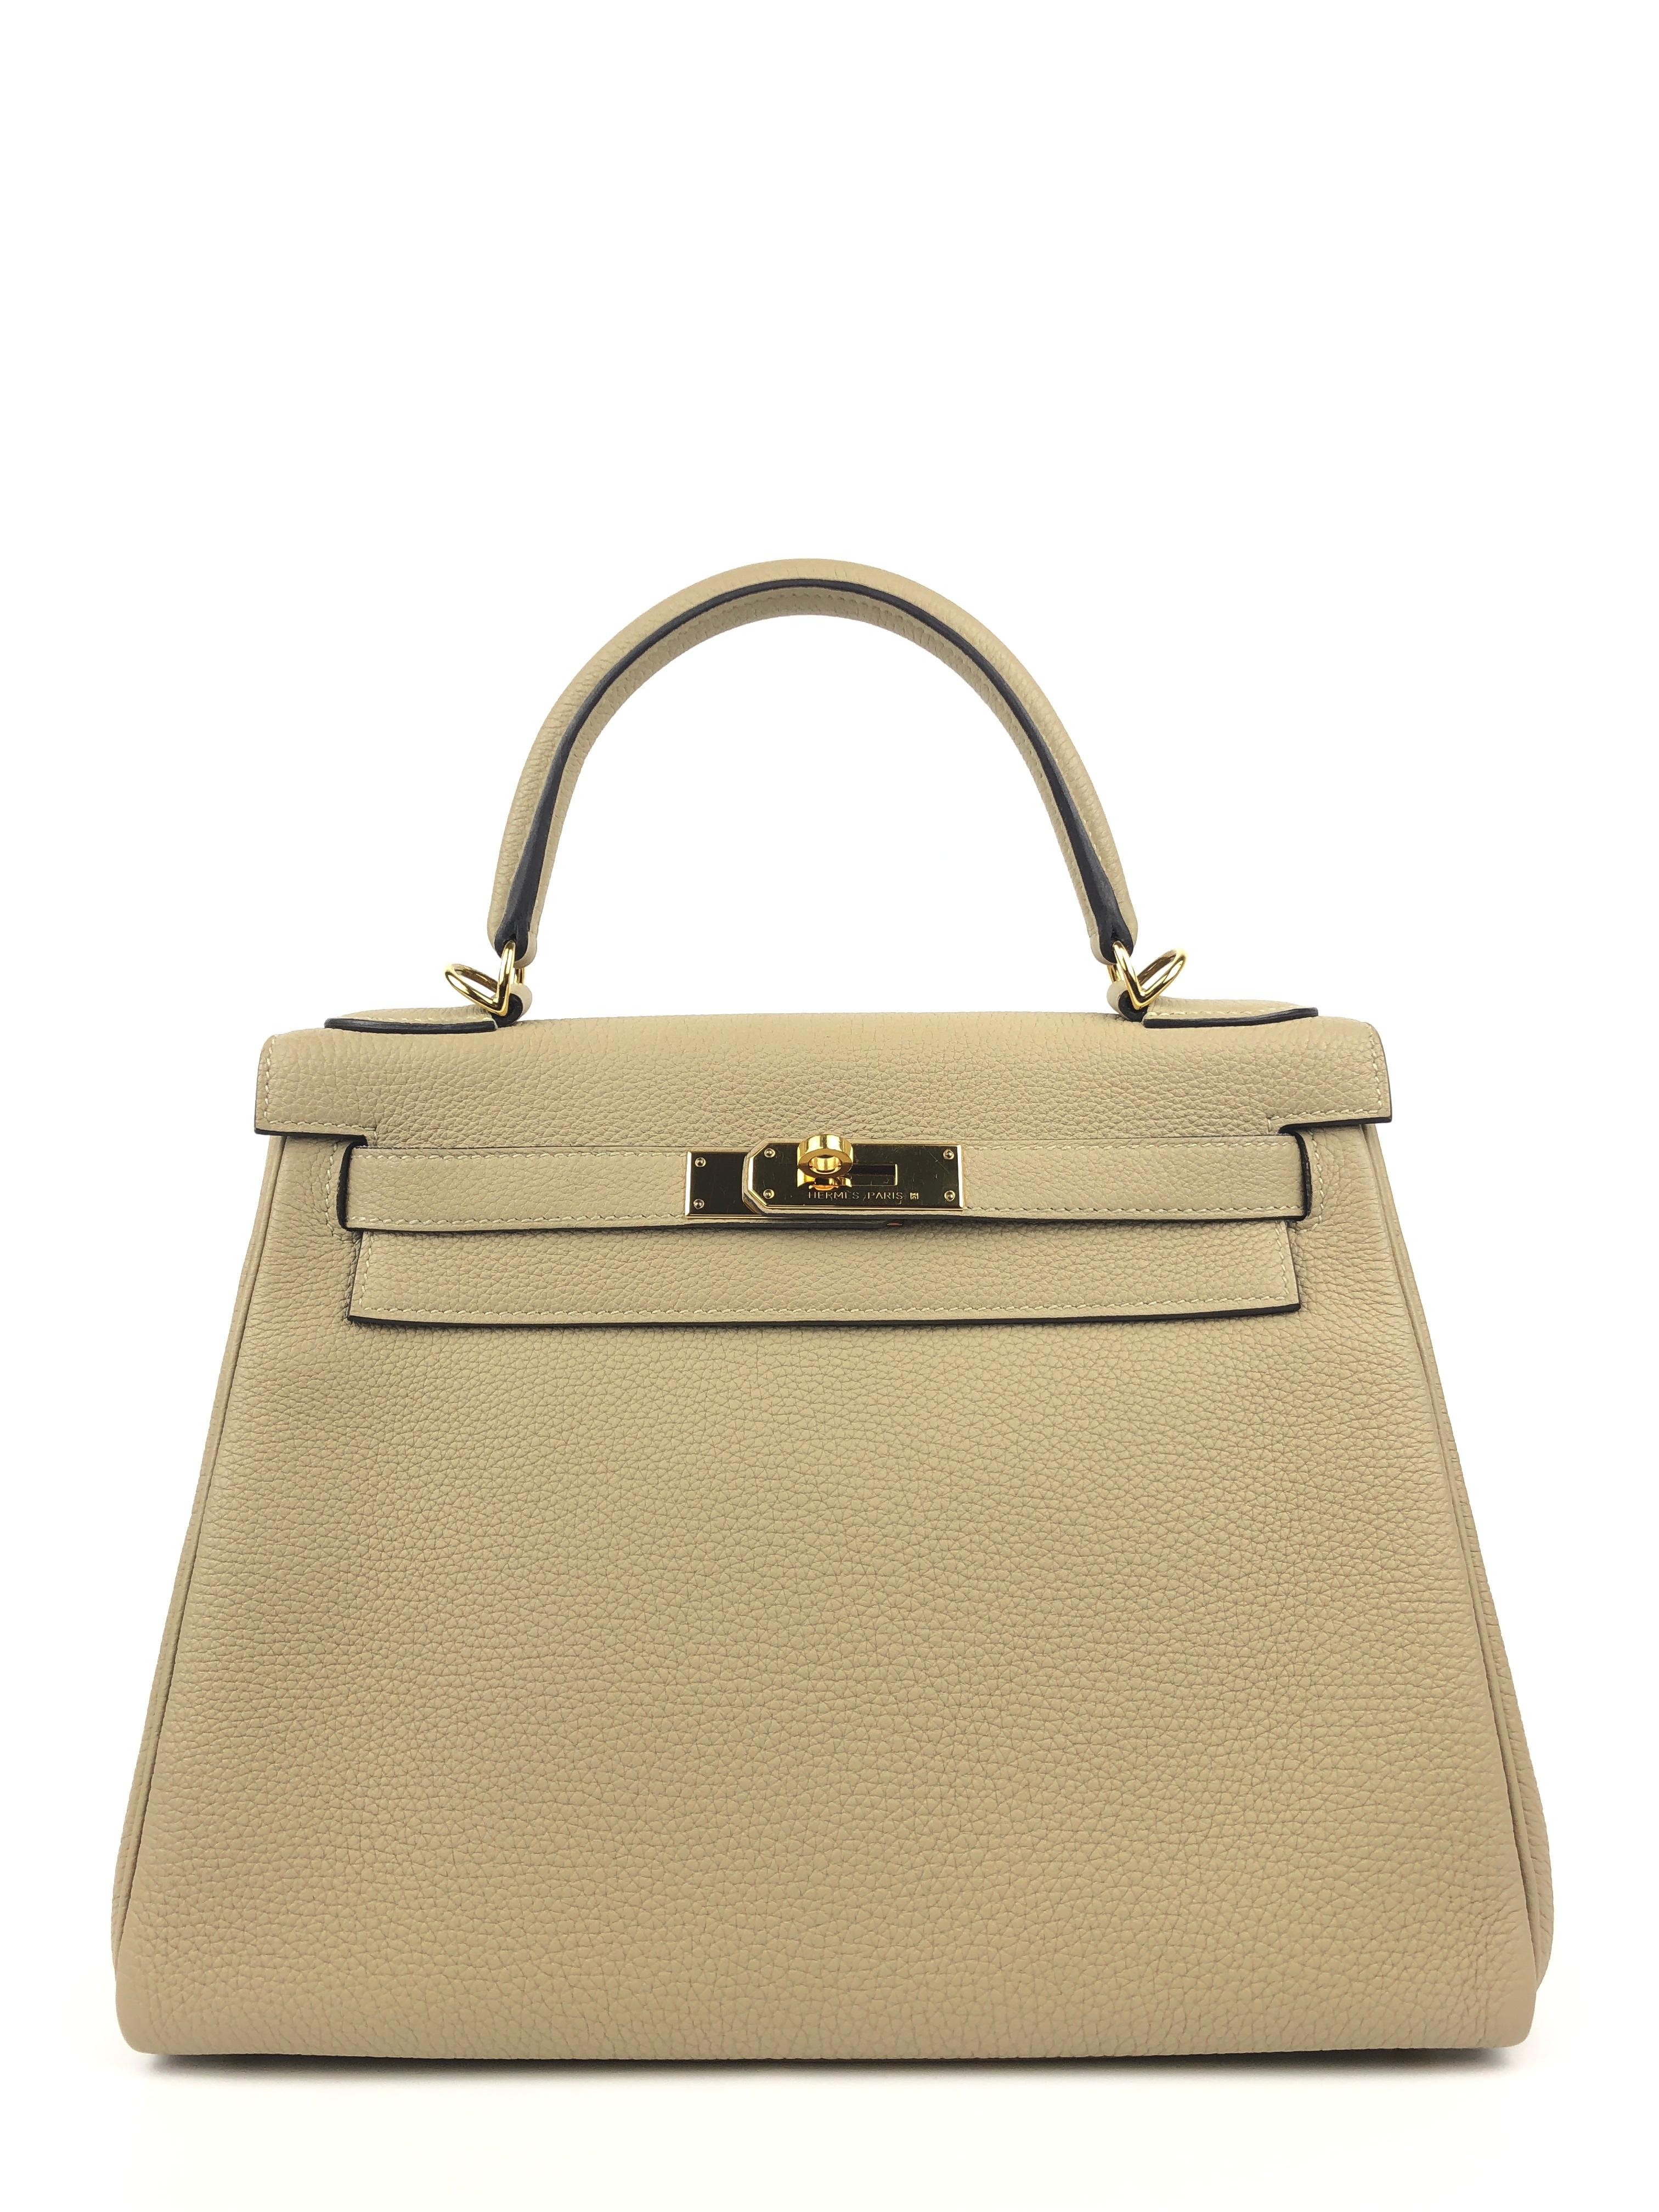 Hermes Kelly 28 Trench Togo Gold Hardware. X Stamp 2016. Excellent Condition, hairlines on hardware. Excellent corners and structure. Includes box and copy of receipt. 

Shop with Confidence from Lux Addicts. Authenticity Guaranteed!